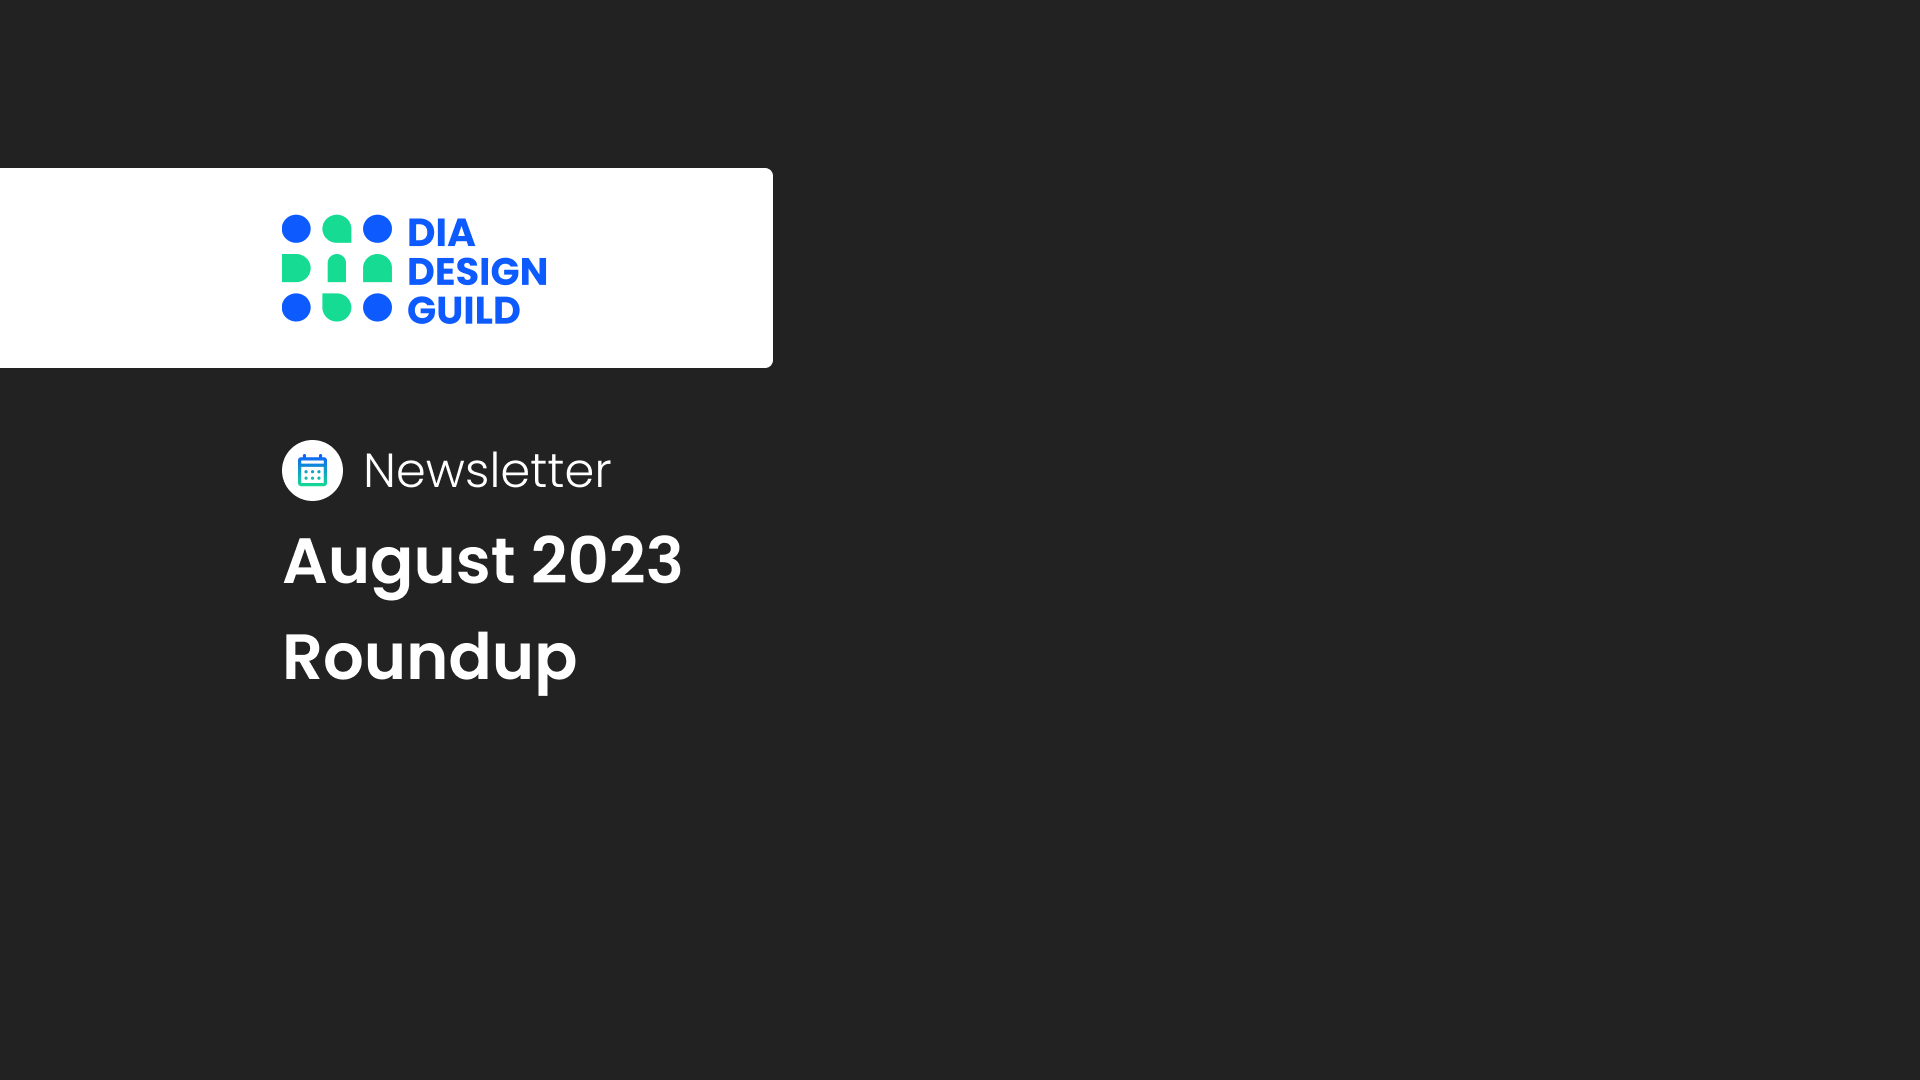 Dark background with the words "August 2023" in white